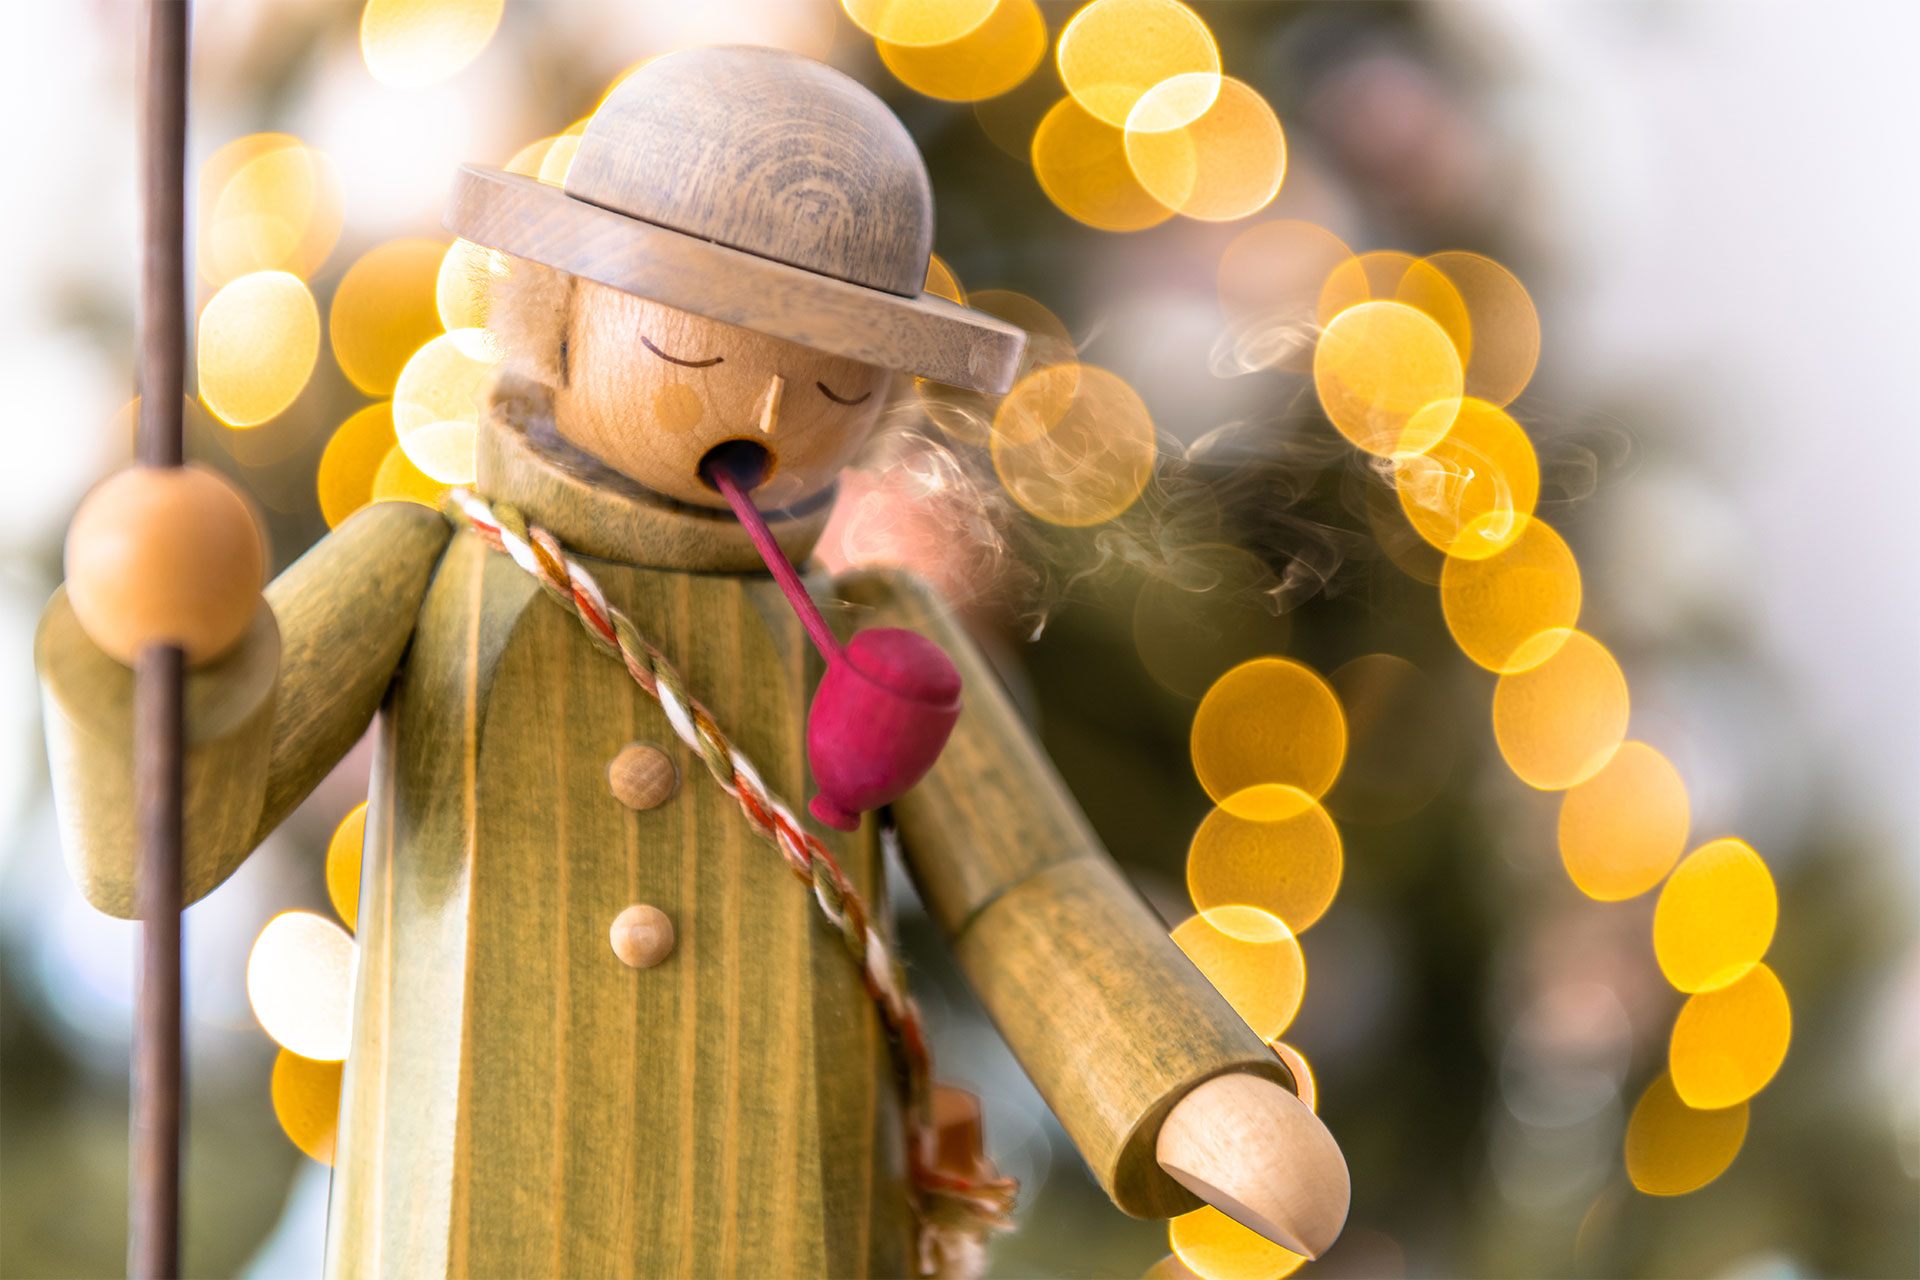 Wooden figure used as decoration for Christmas in Germany